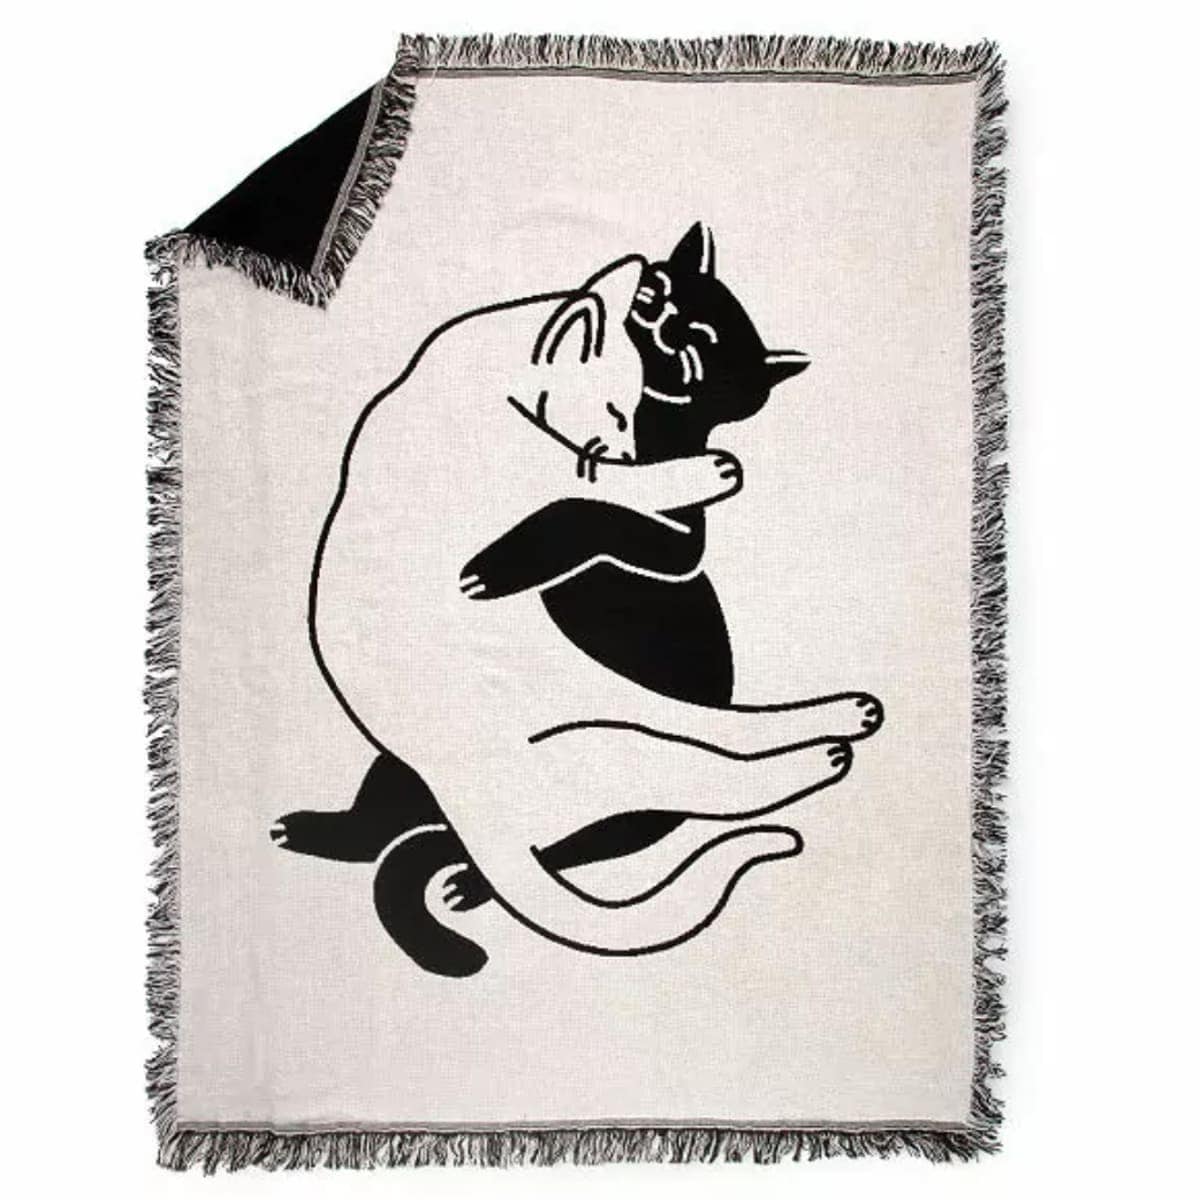 A Snuggle Cat Throw Blanket perfect as a Mother's Day gift